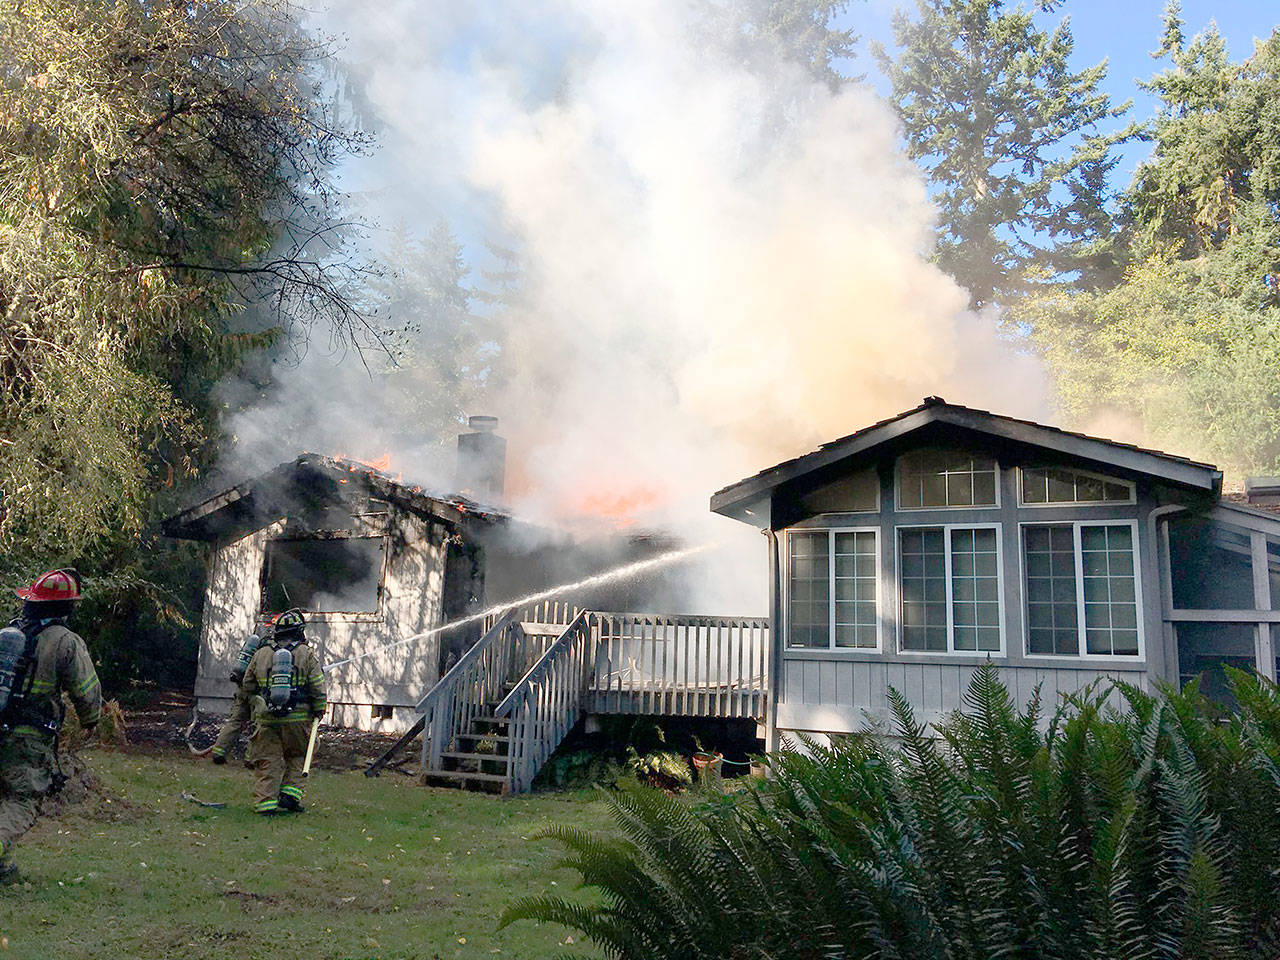 An unidentified elderly woman sustained minor injuries in a fire at her Port Townsend home Wednesday. (East Jefferson Fire-Rescue)